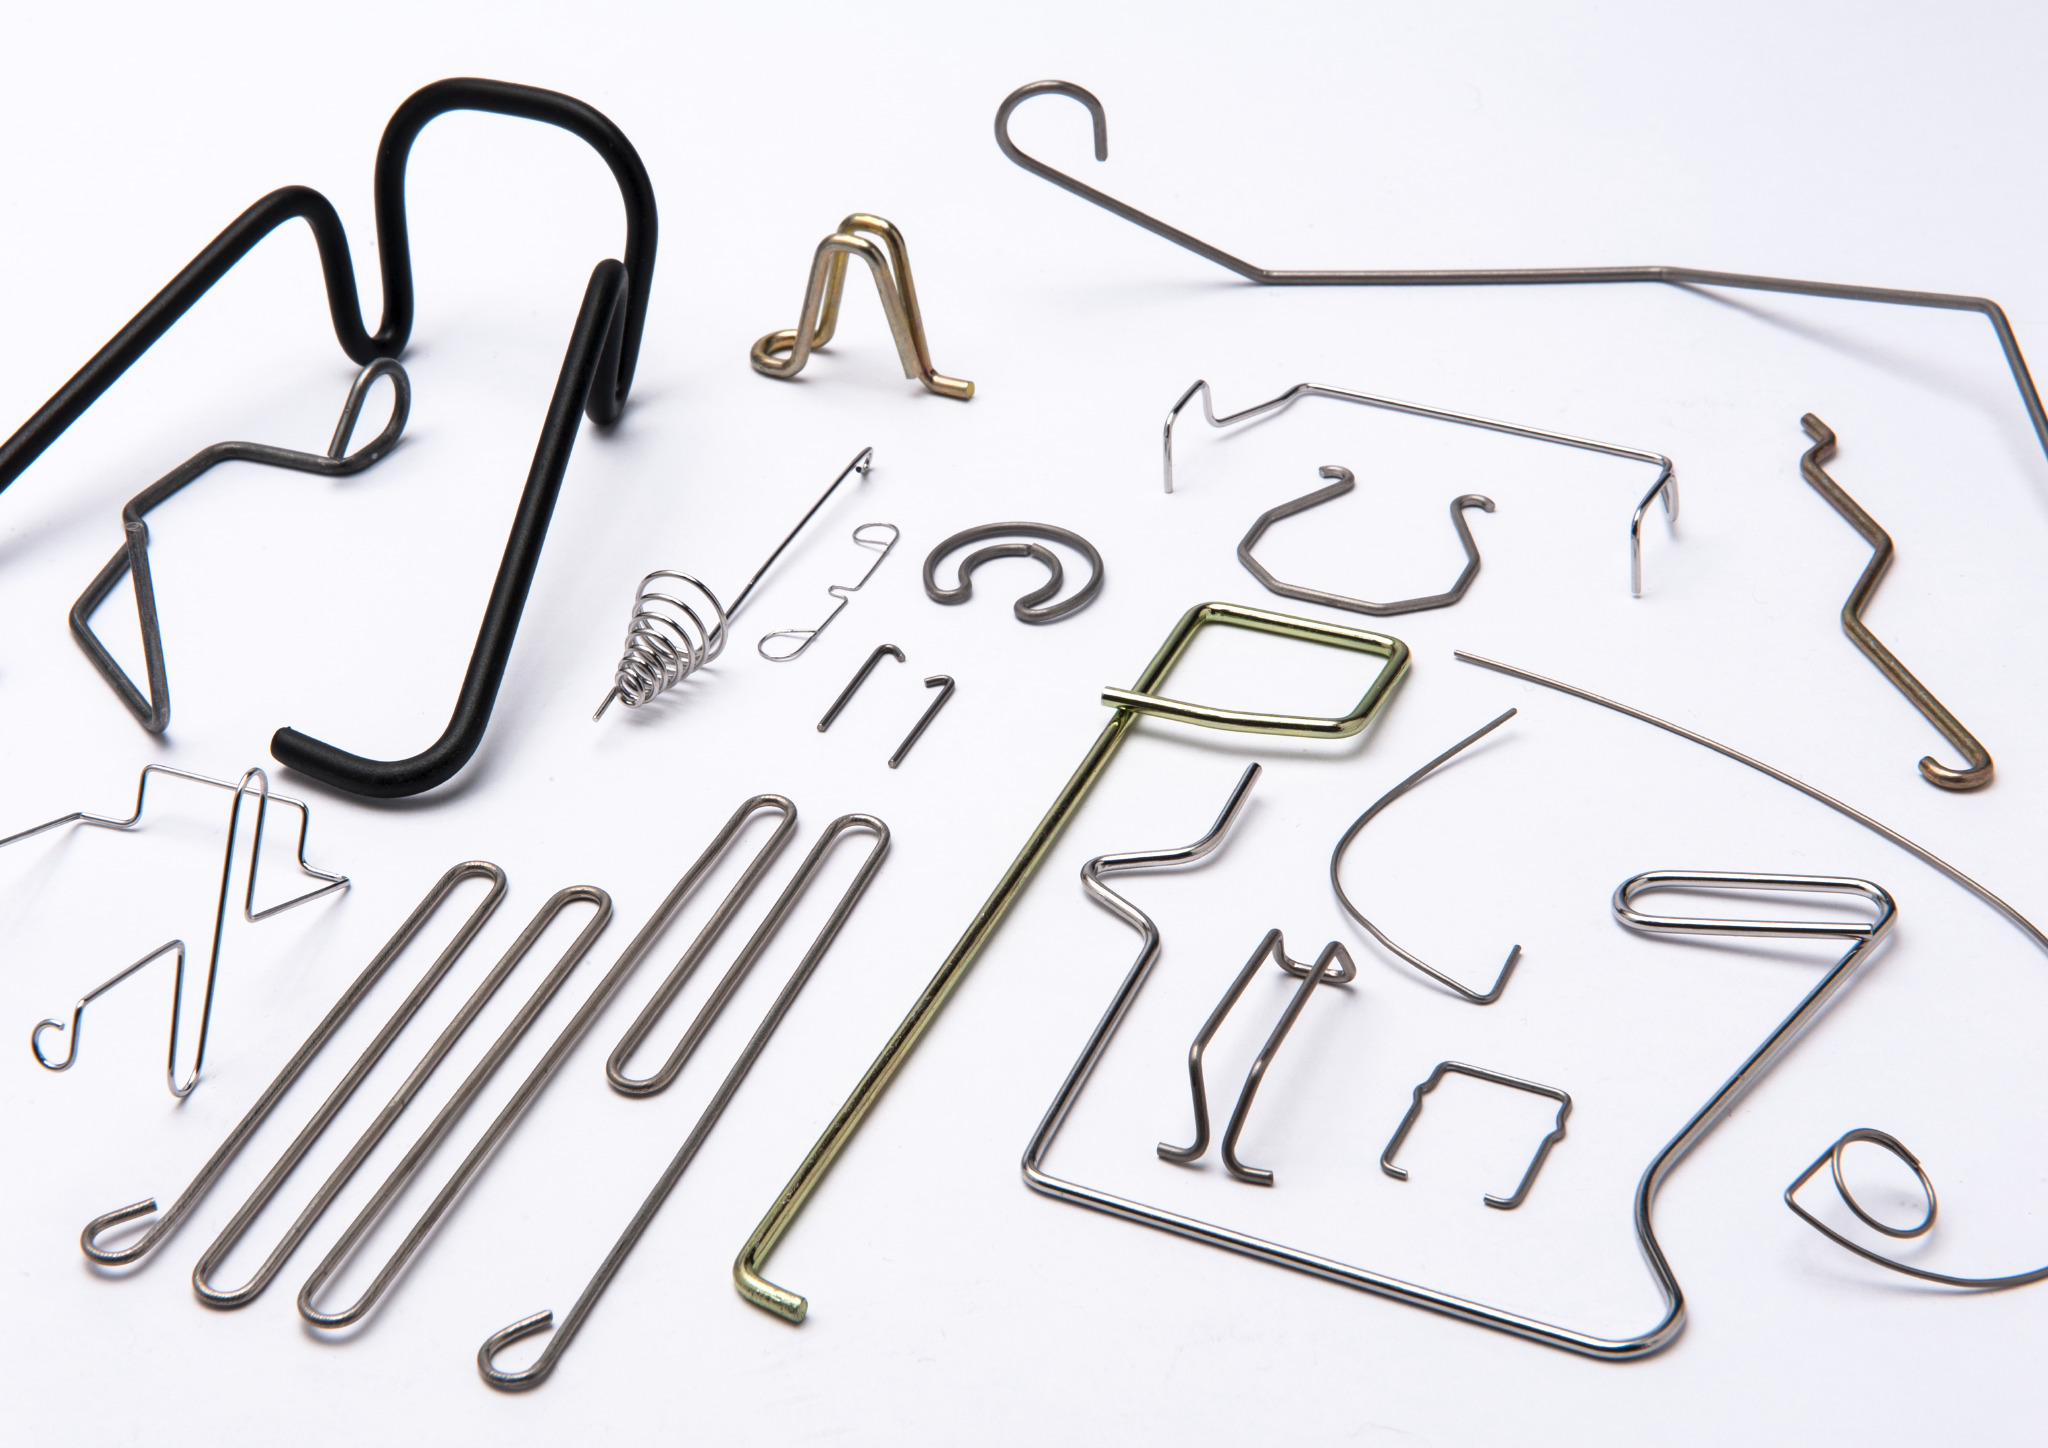 Custom Wire Forming and Wire Form Design Resources